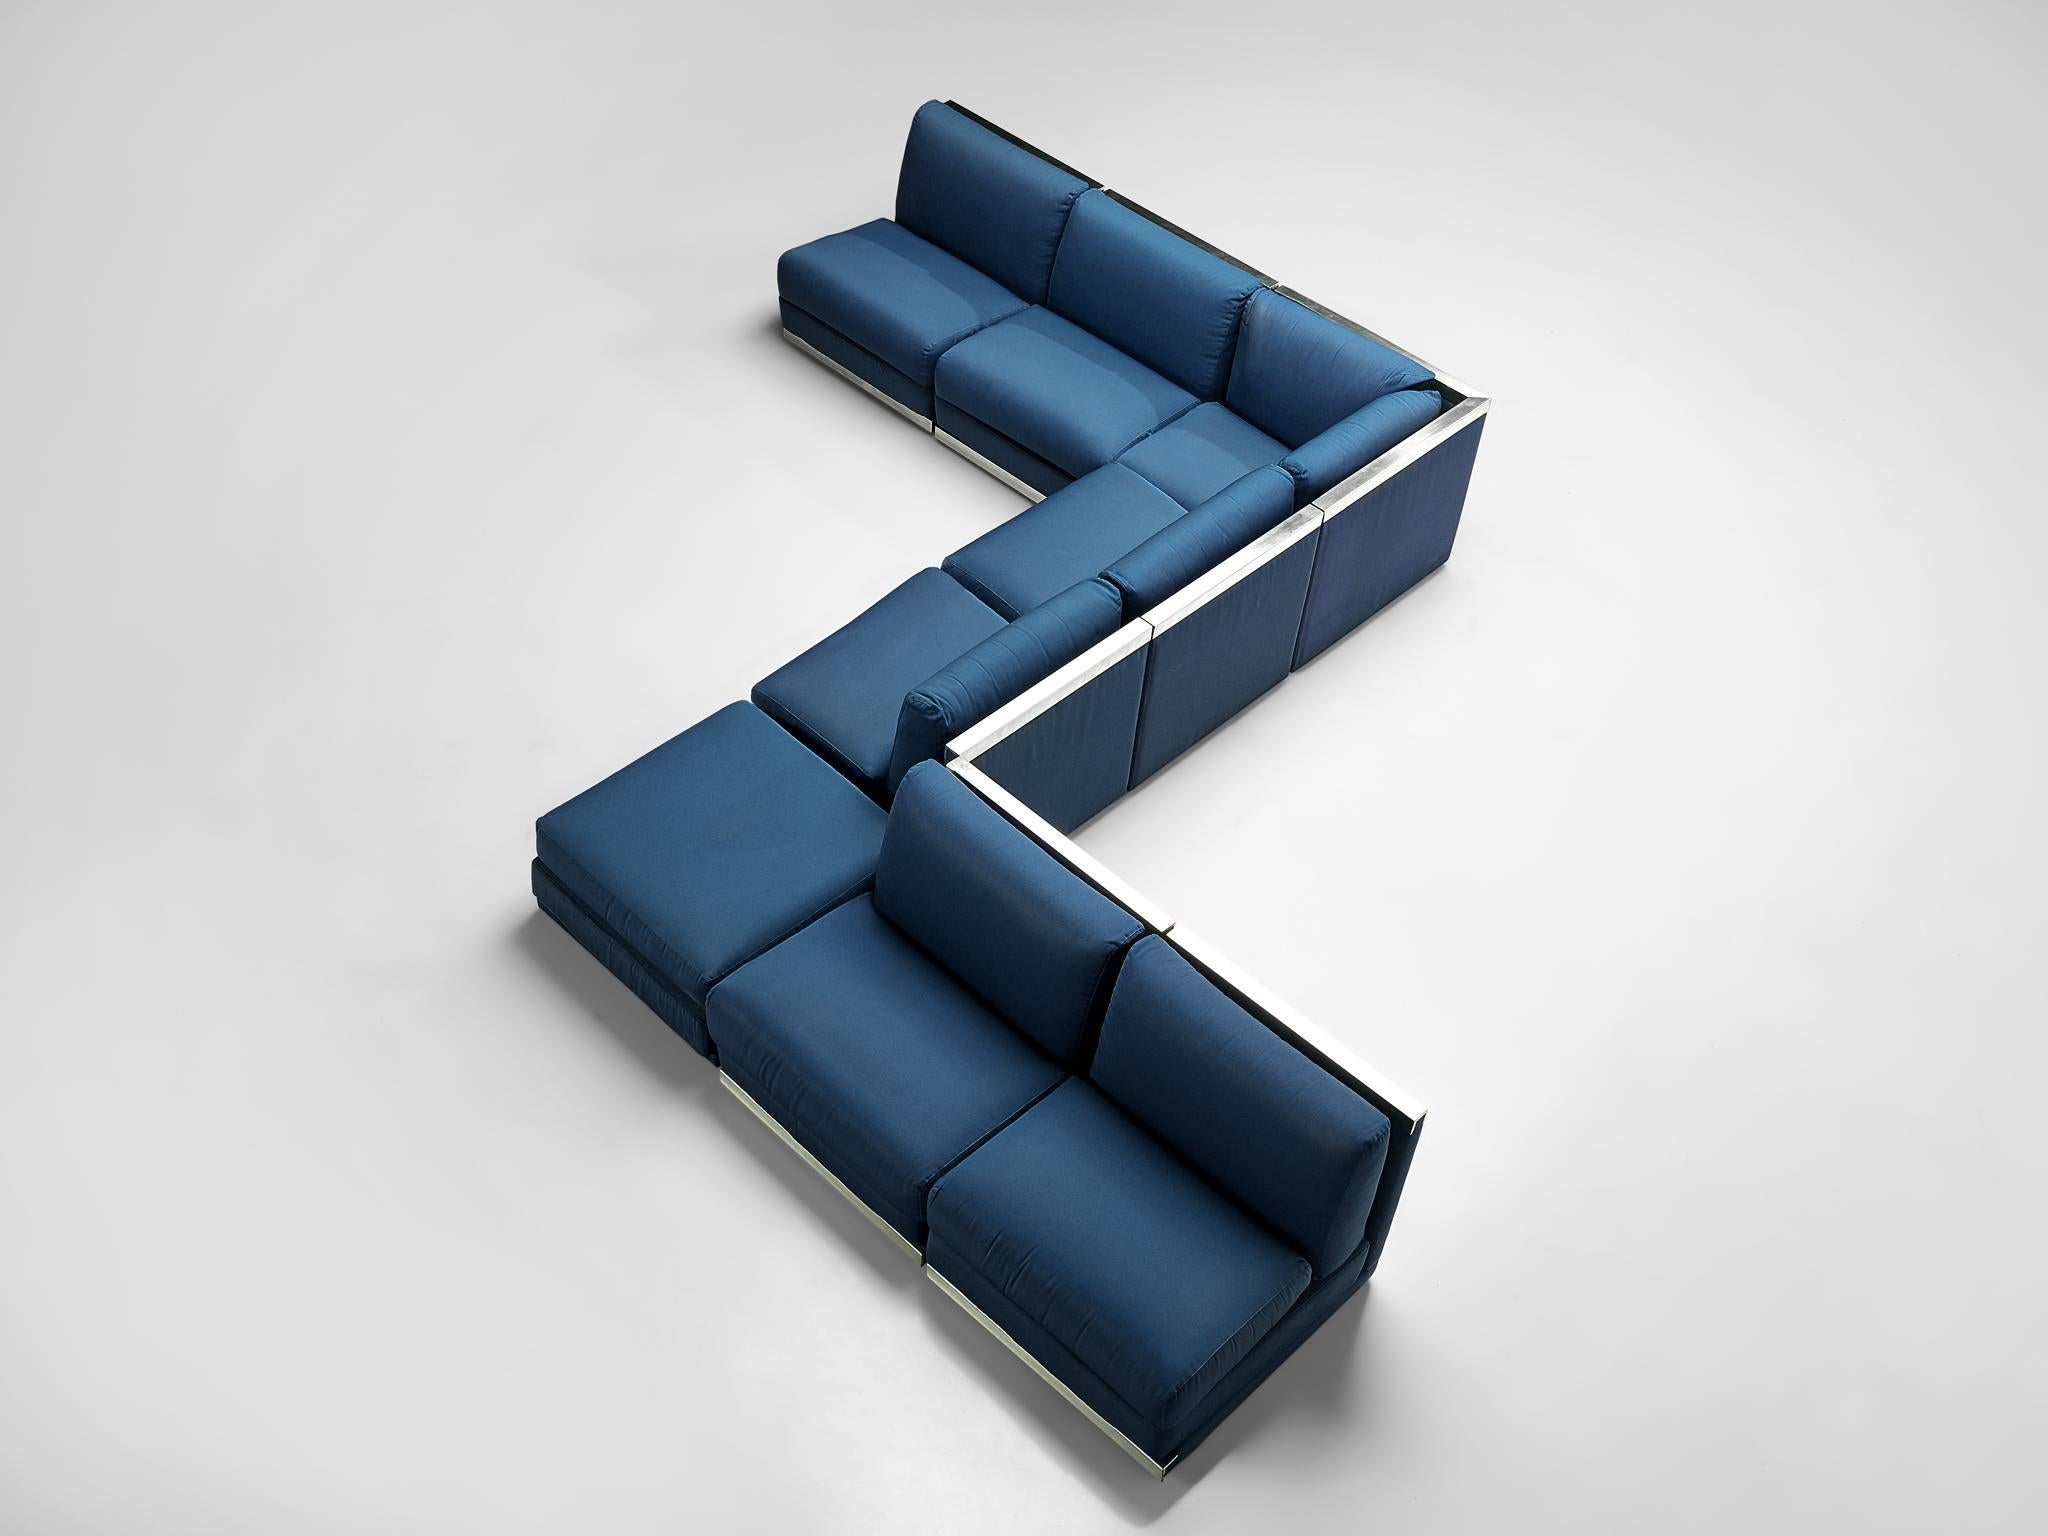 Sectional sofa, kobalt blue fabric upholstery, aluminum, Italy, 1980s

Large Postmodern modular sofa, consisting of 6 straight seating elements, one corner and an element without backrest usable as a side table or ottoman. A perfect piece to place